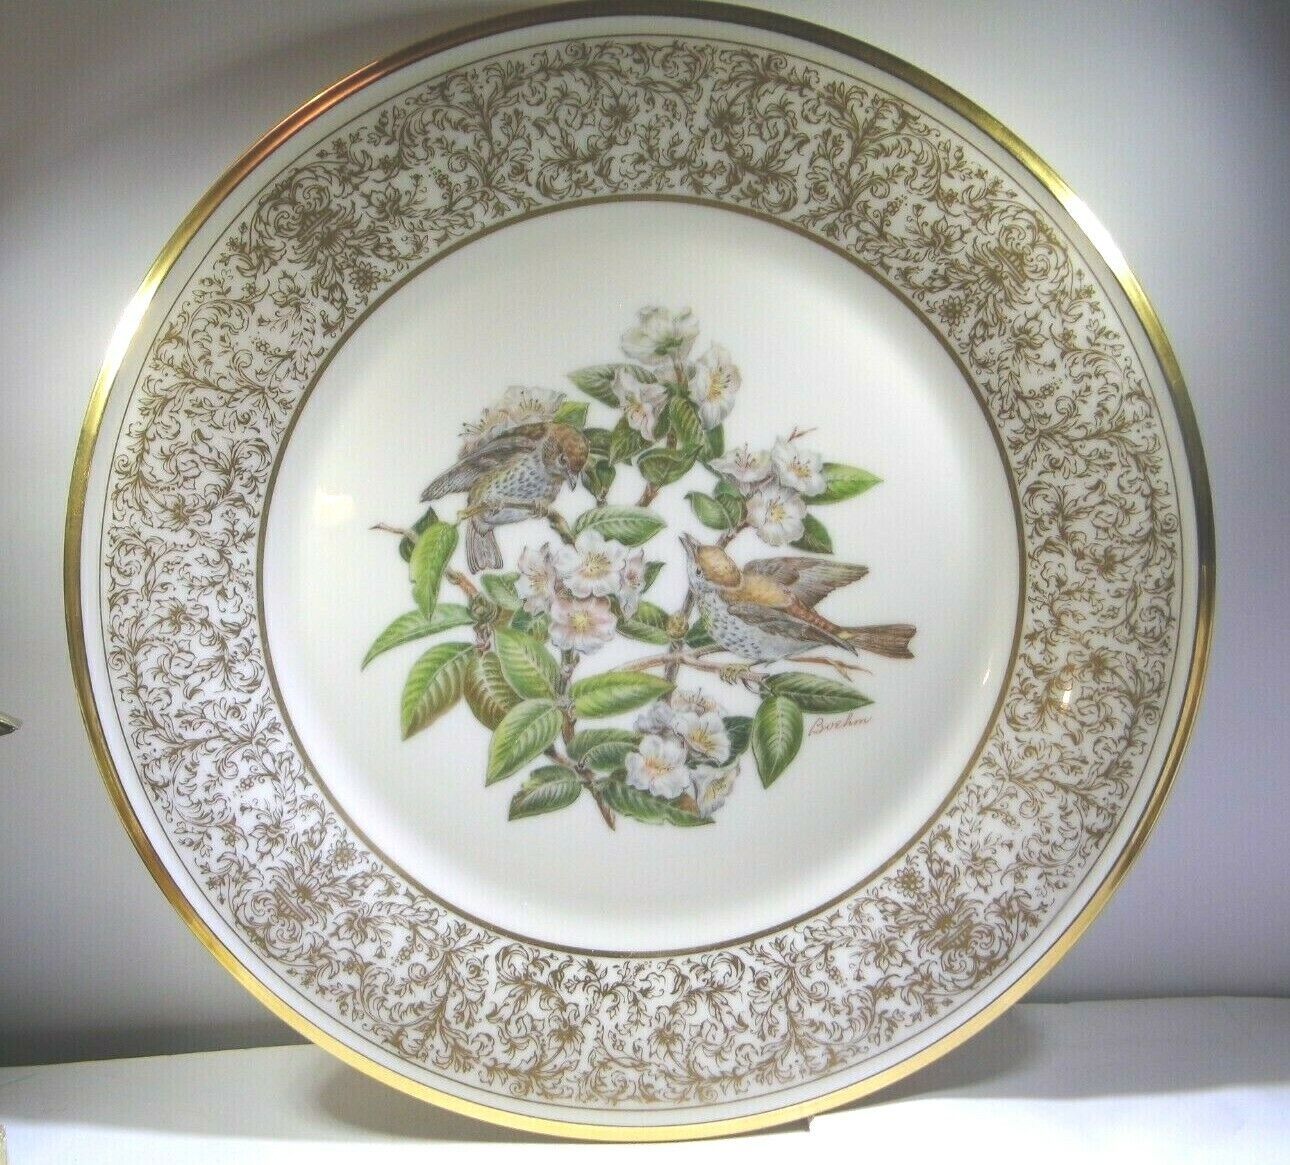 Primary image for Lenox China Boehm 1970 "Wood Thrush" Plate New in Original Boxes